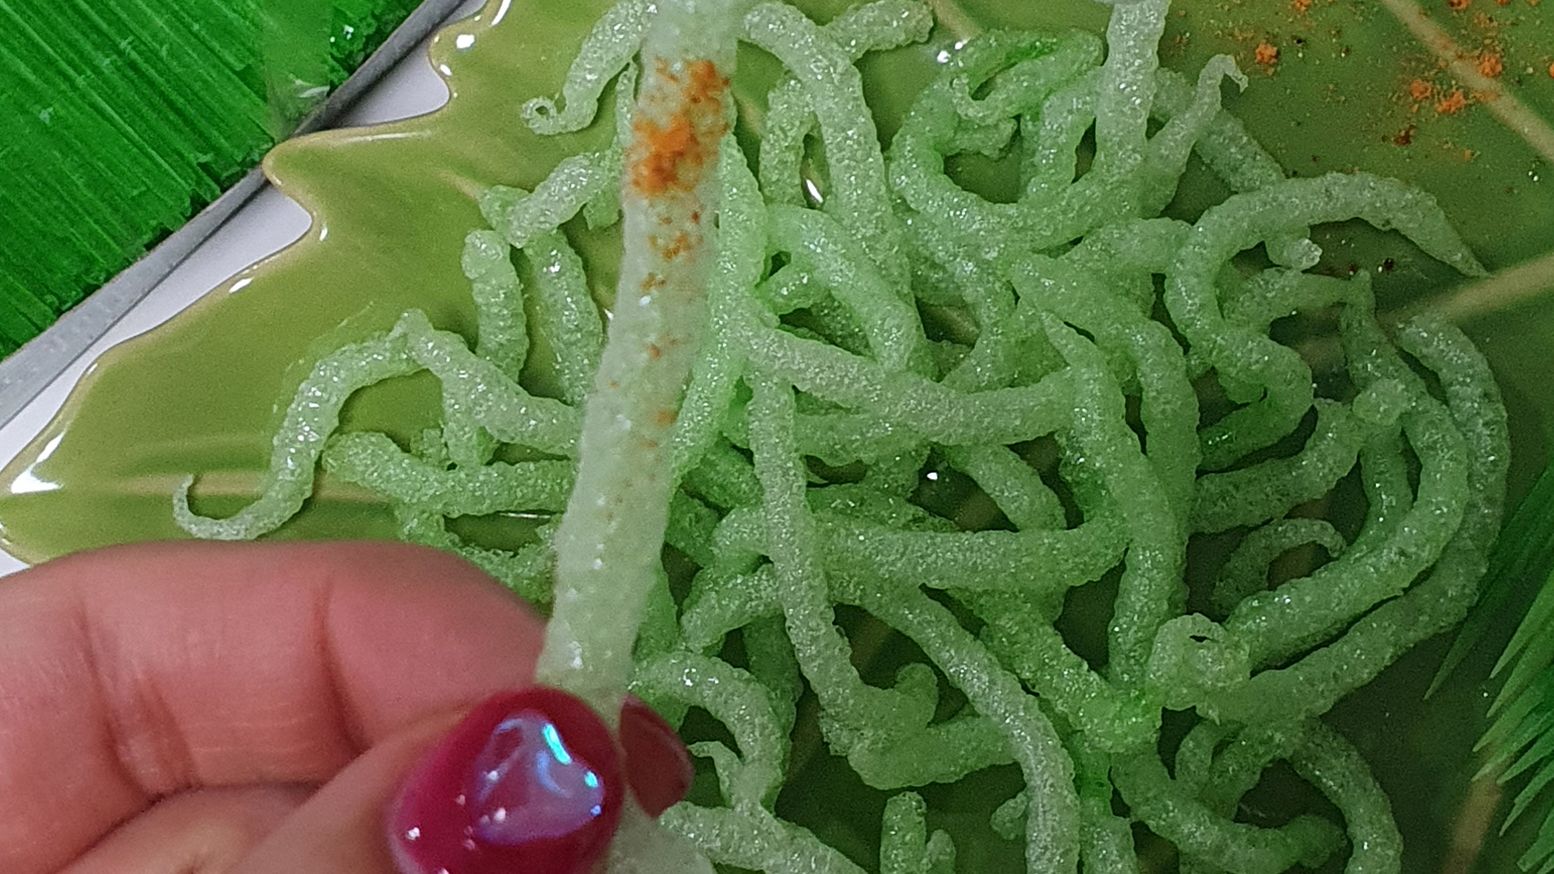 A person holds a Fried green toothpick which went viral following a social media trend.